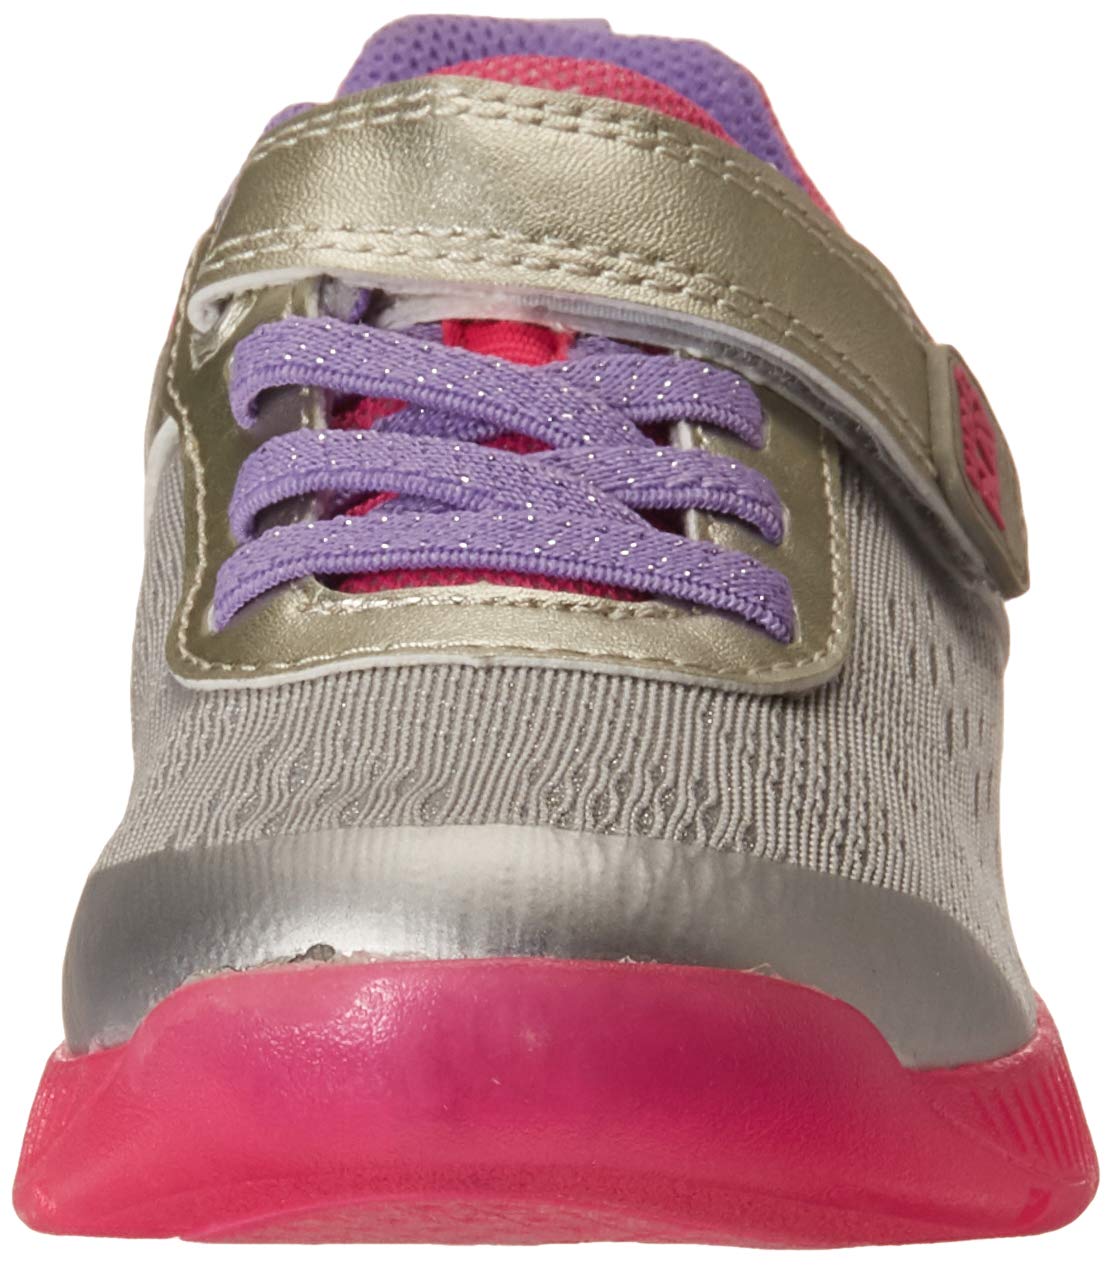 Stride Rite Kids' Made2play Lighted Neo Sneaker